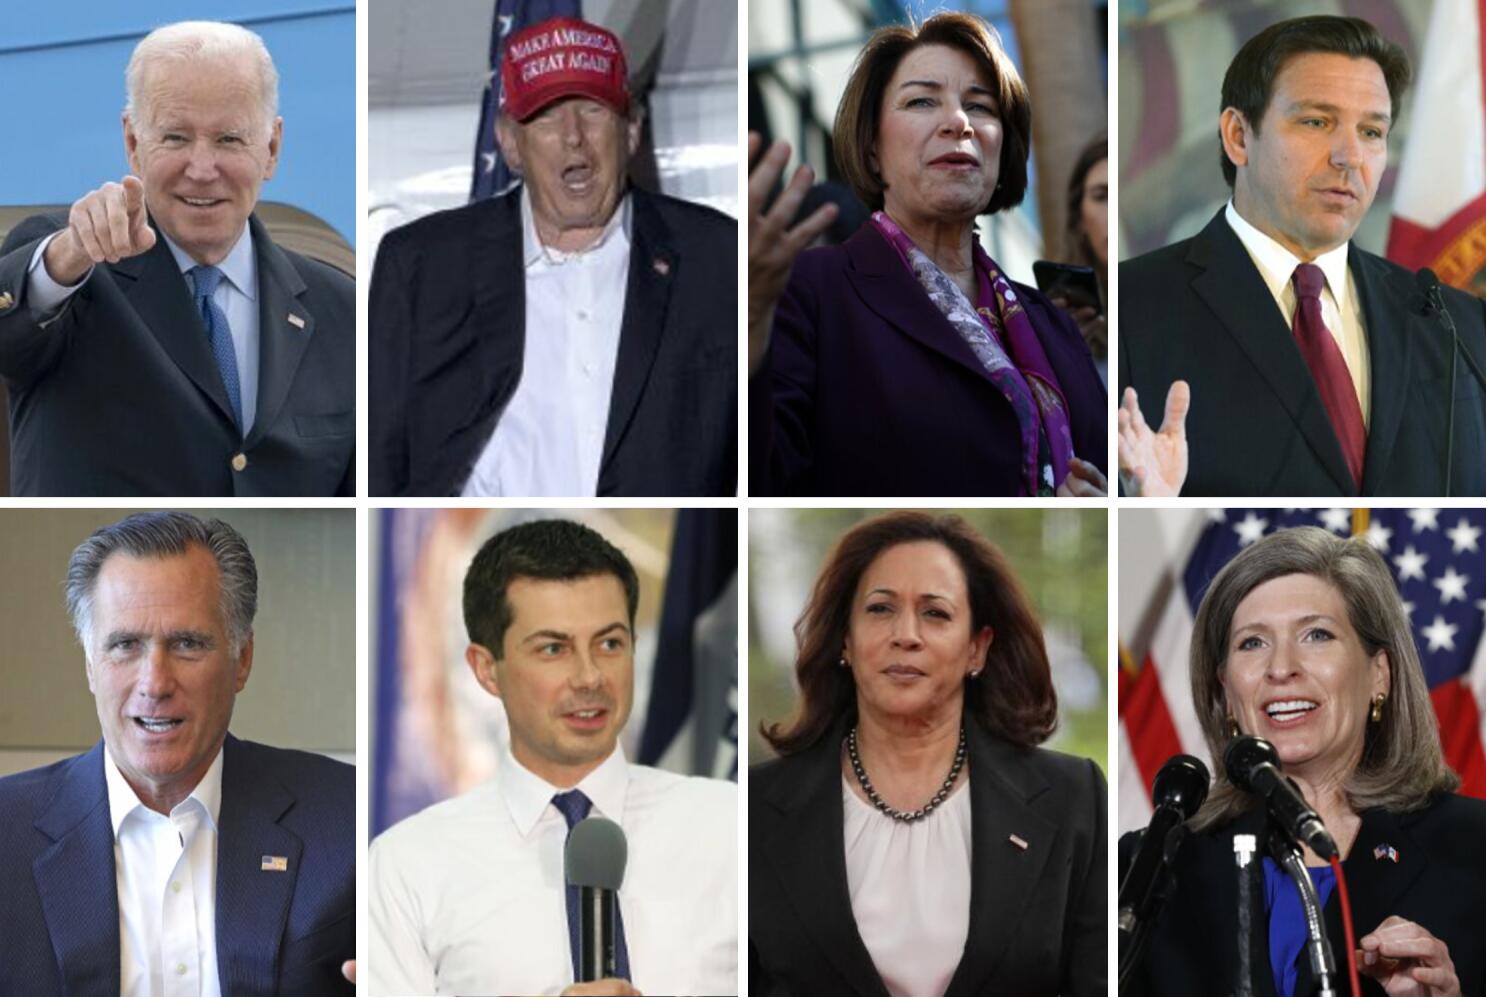 Opinion: What names come to mind as presidential candidates for 2024? - The  San Diego Union-Tribune